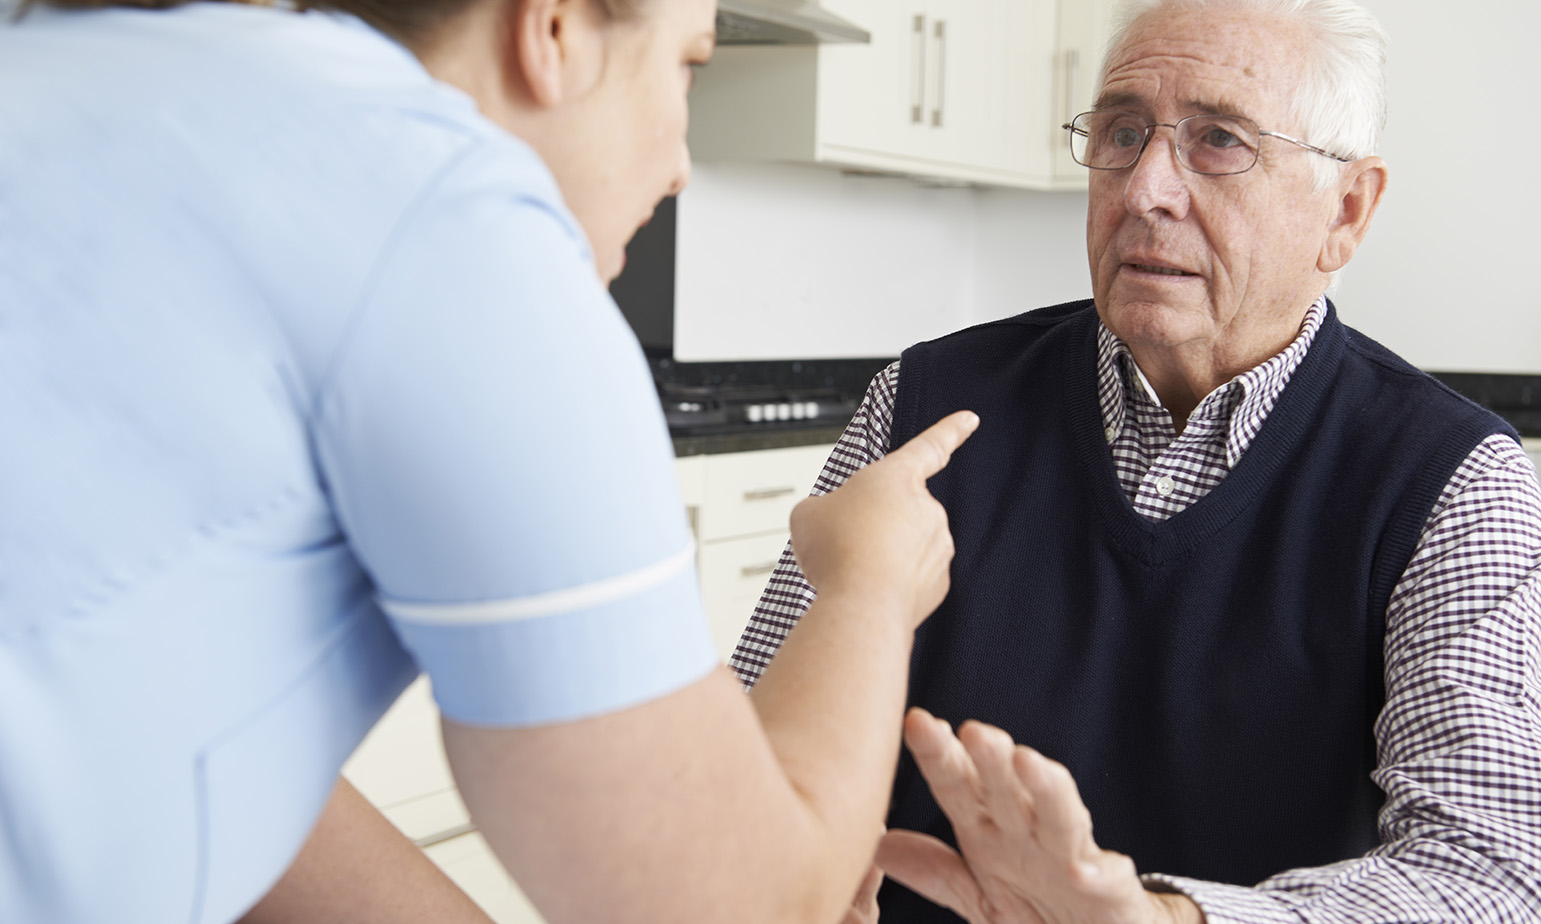 Old man being berated by care worker in his home